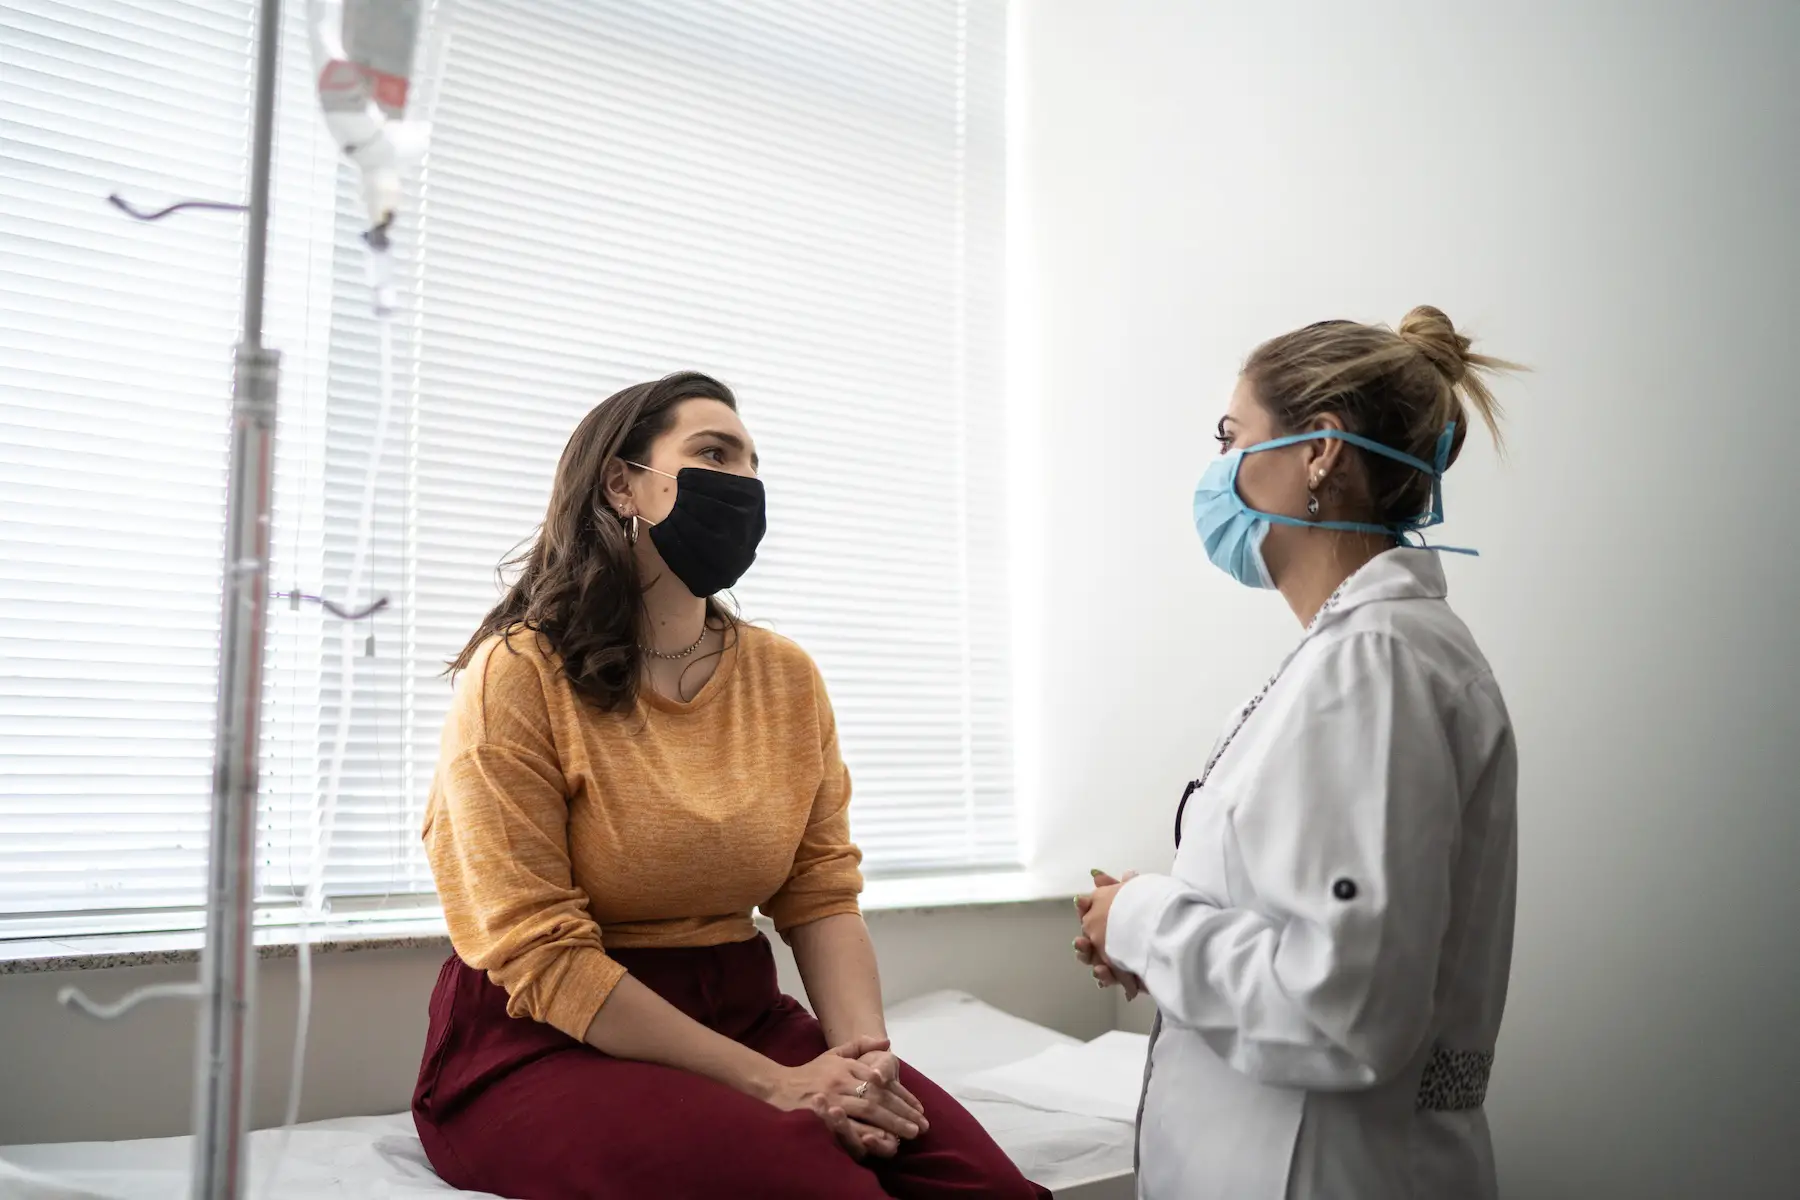 Patient talking to doctor at a women's healthcare center; both are wearing masks